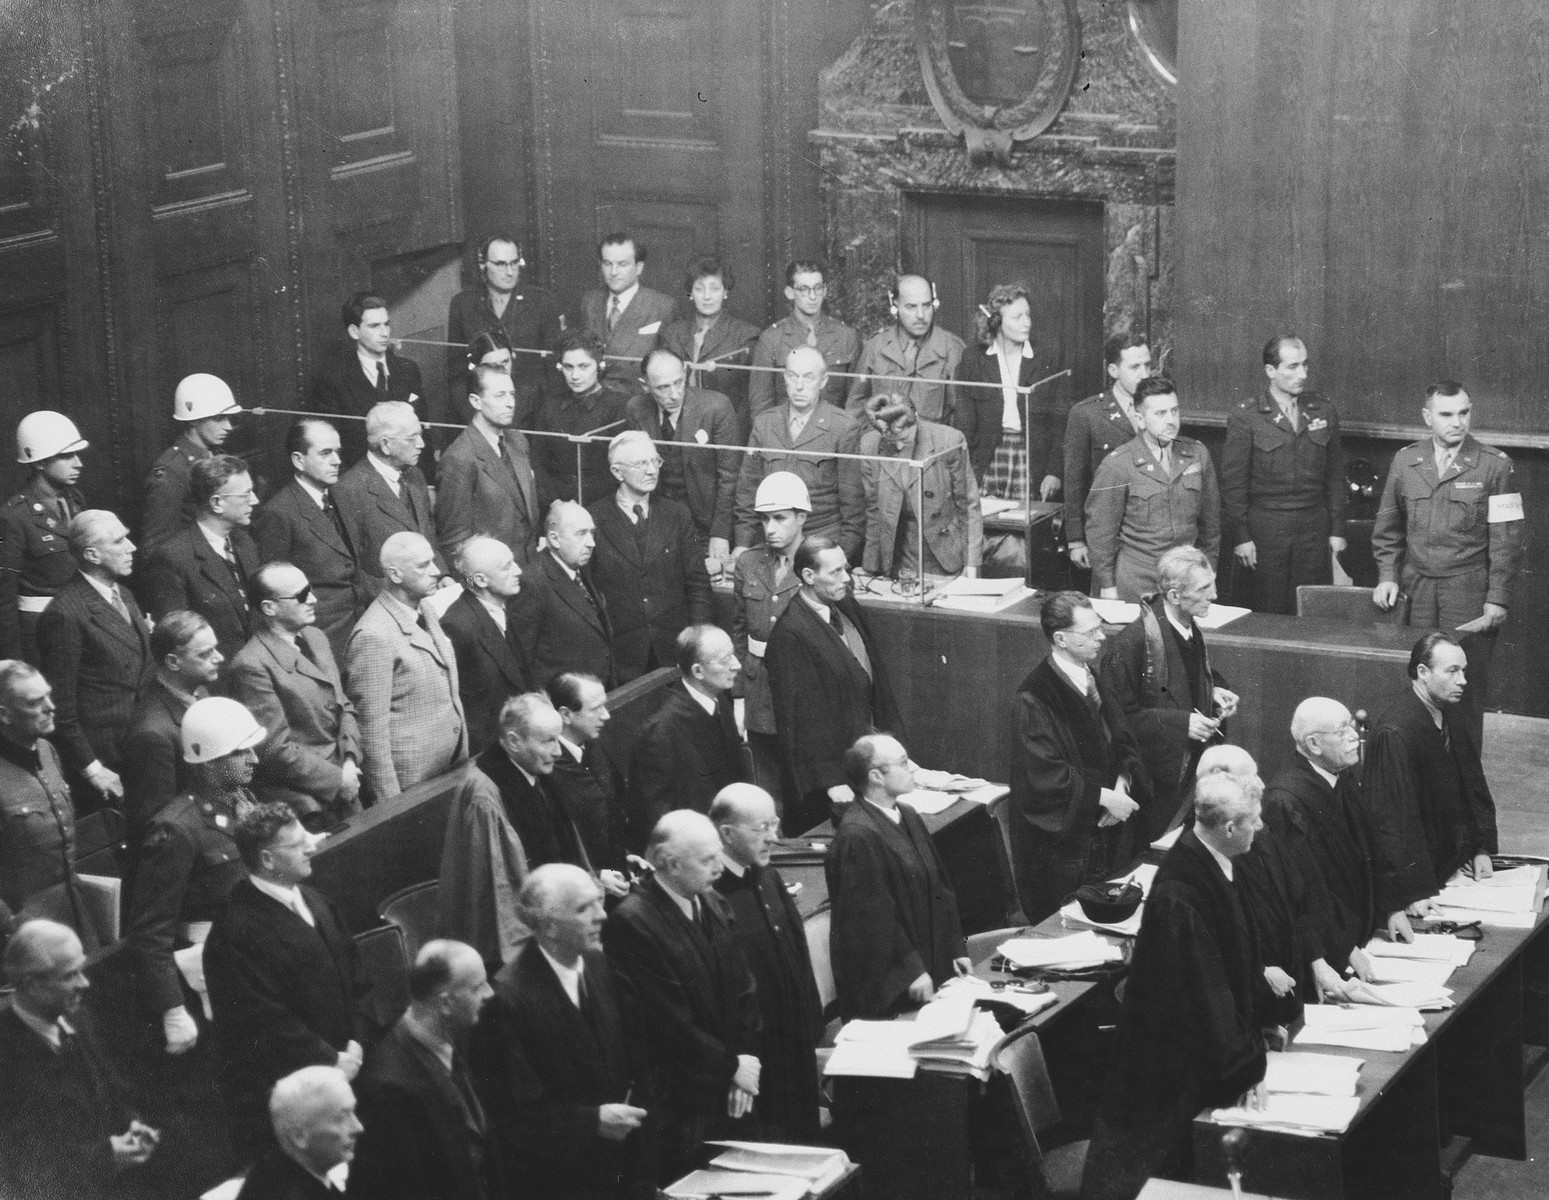 The defendants and defense attorneys stand in their places at a session of the International Military Tribunal trial of war criminals at Nuremberg.